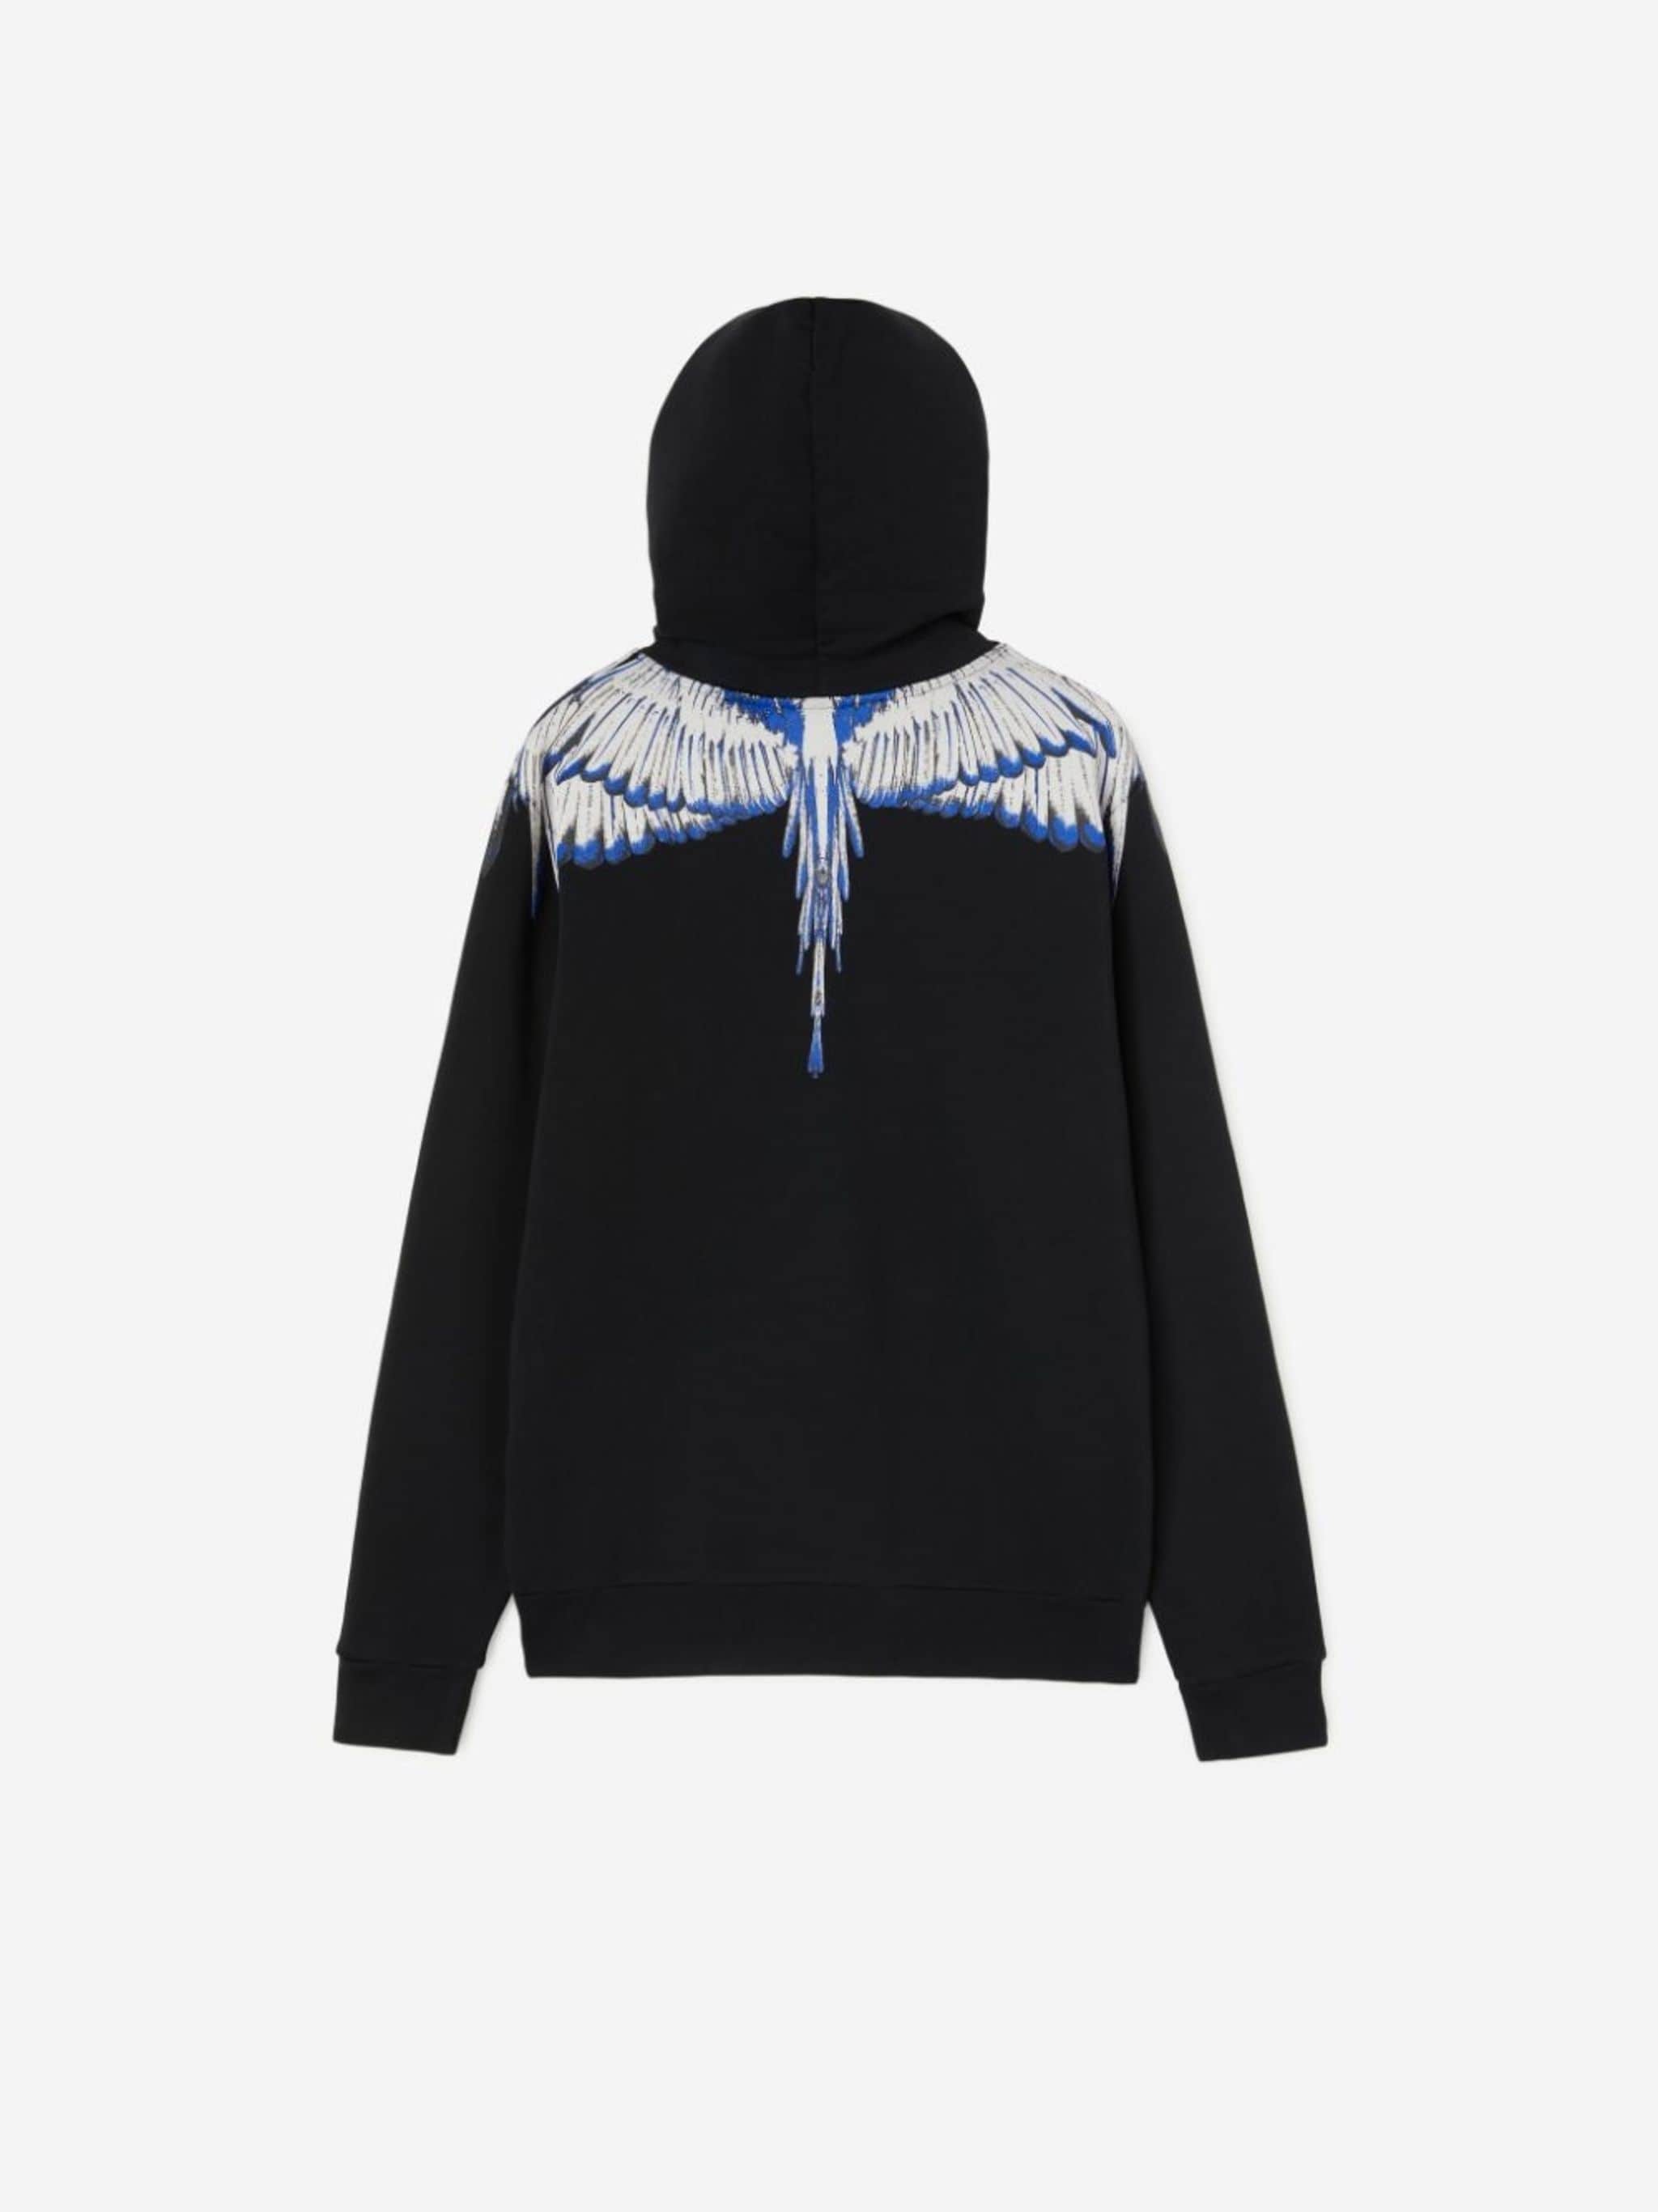 Wings-print drawstring hoodie from Marcelo Burlon County of Milan featuring black, white, blue, cotton, signature Marcelo Burlon Wings print, drawstring hood, long sleeves, front pouch pocket, ribbed hem and ribbed cuffs. Conscious: This item is made from at least 50% organic materials.